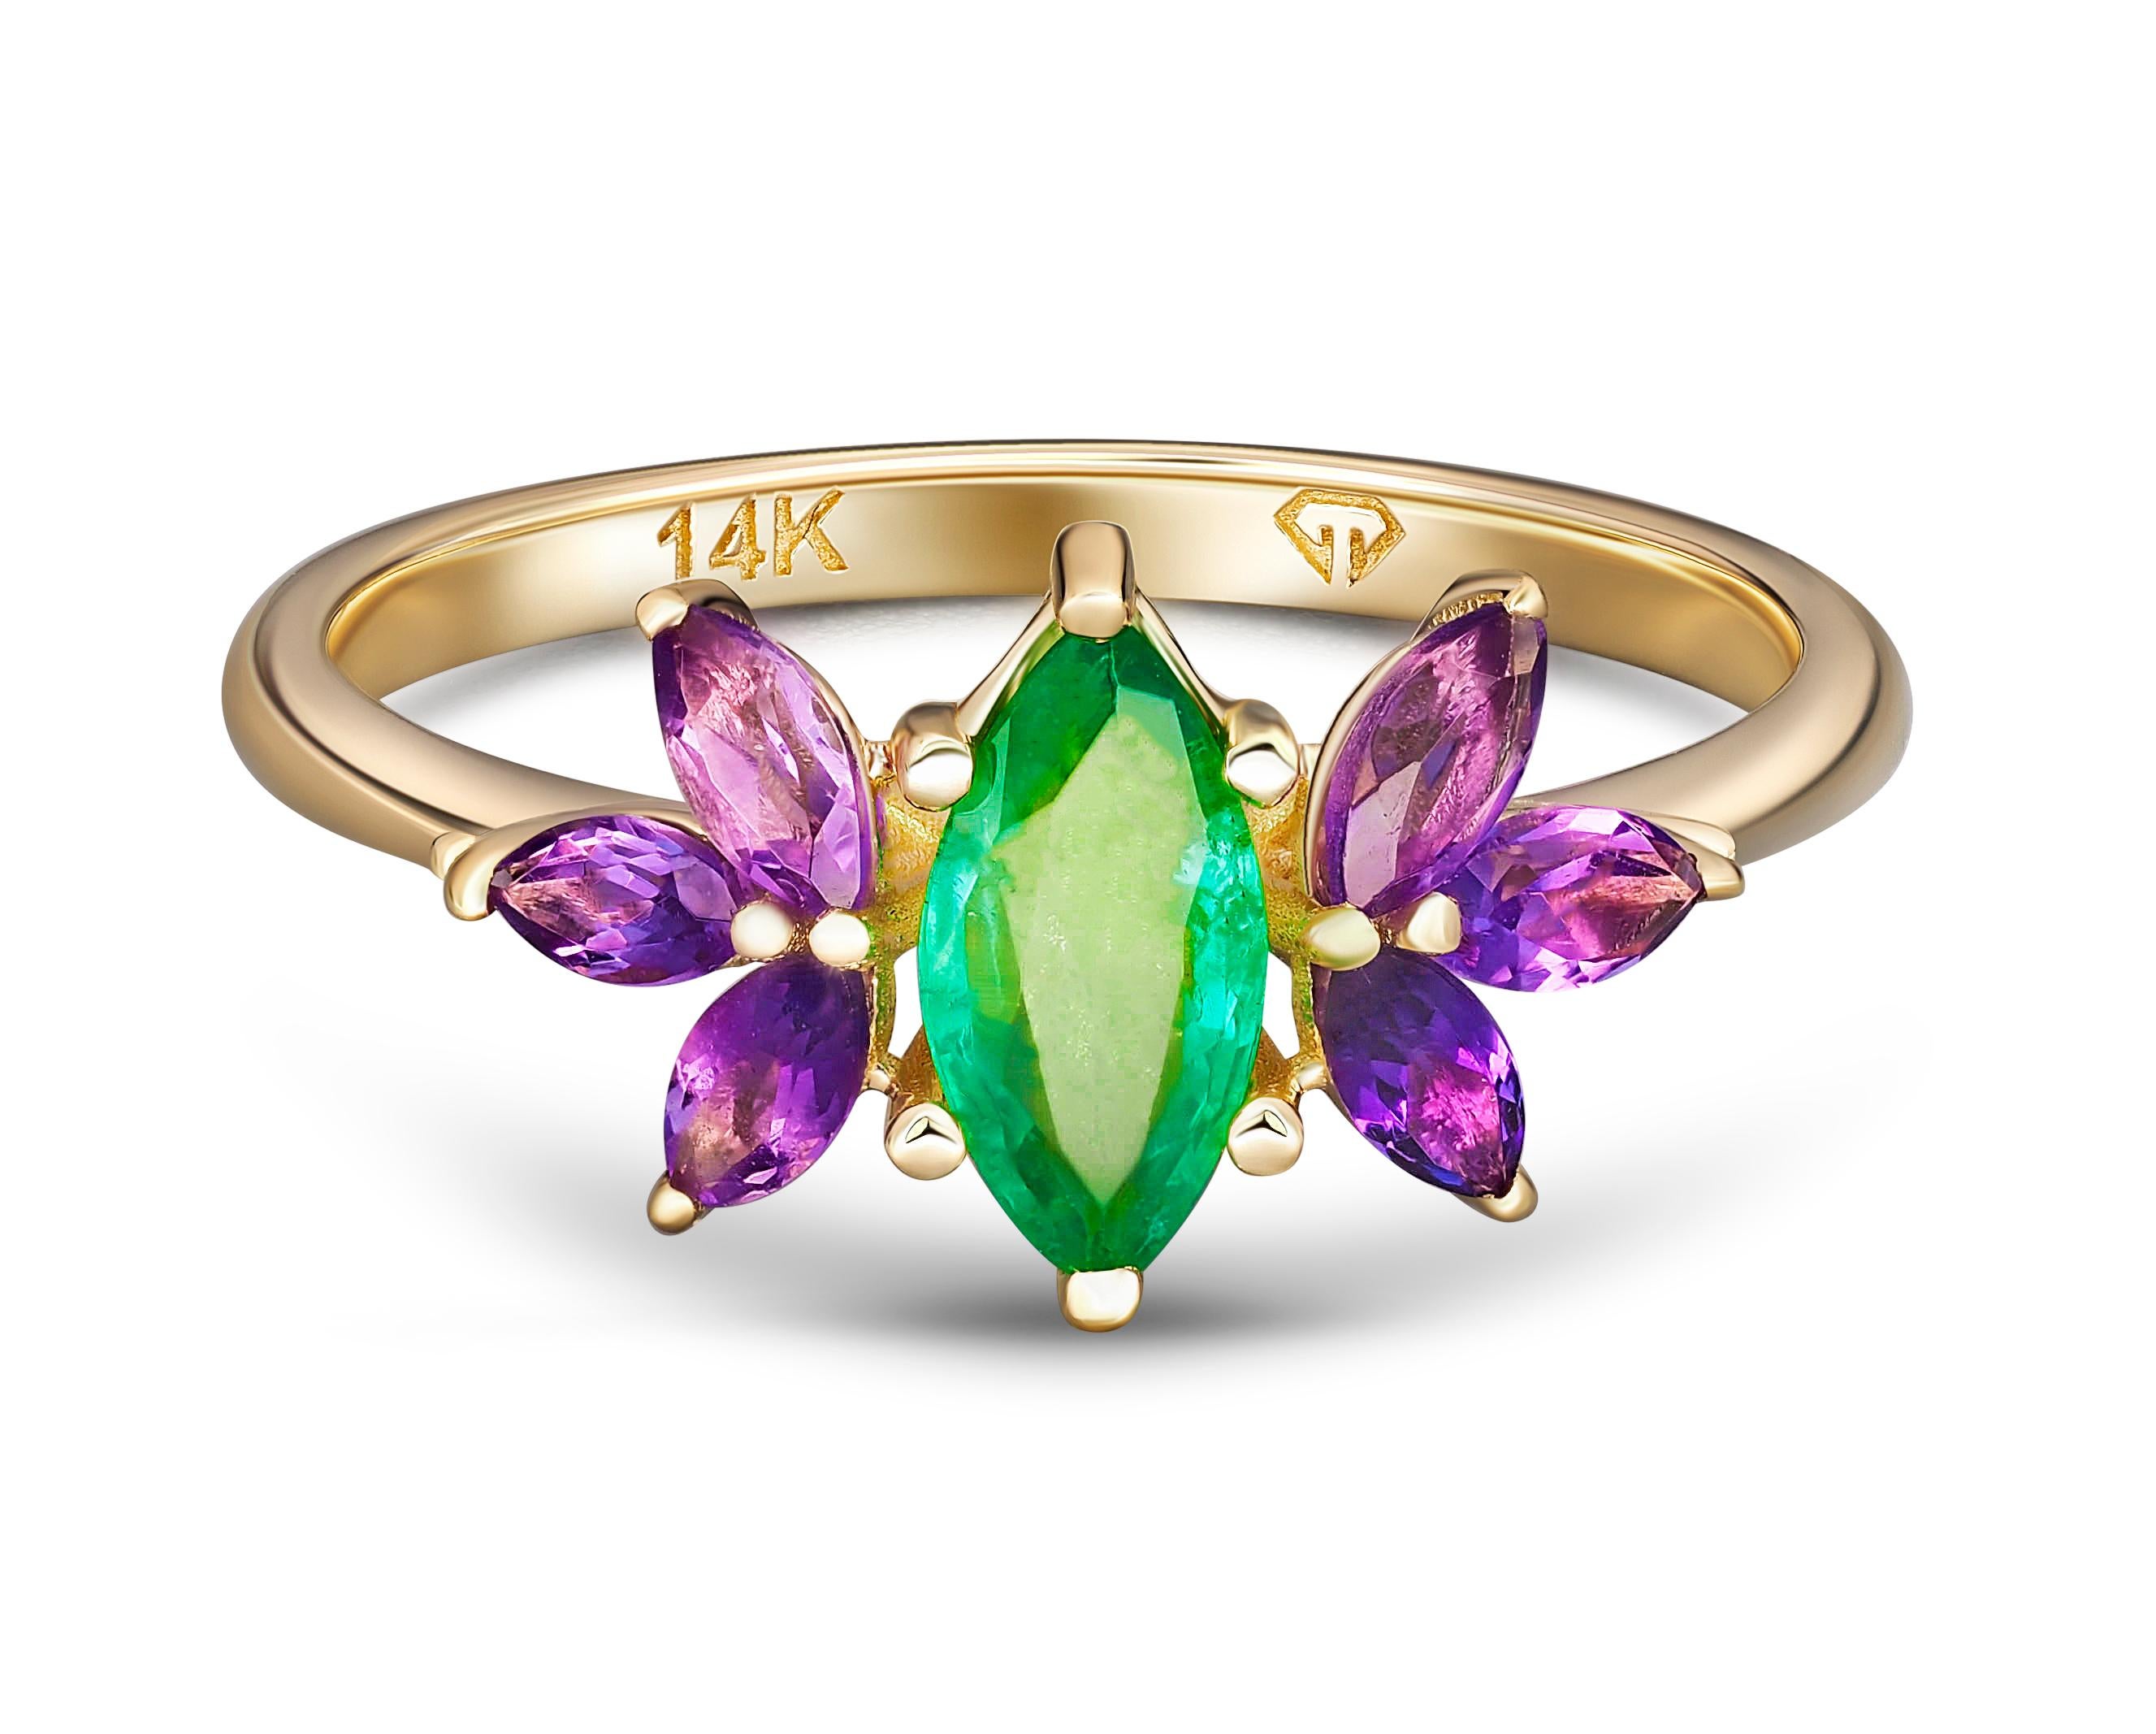 14 kt. Gold - Ring - 0.70 ct Emerald - Amethysts.
Total weight: 1.7 g. depend from size
Metal: 14k gold

Weight: 2.2 g.
Size 17.3 (55, 7.5)
Set with emerald, color - green
Marquise cut, 0.70 ct. in total.
Clarity: Transparent with